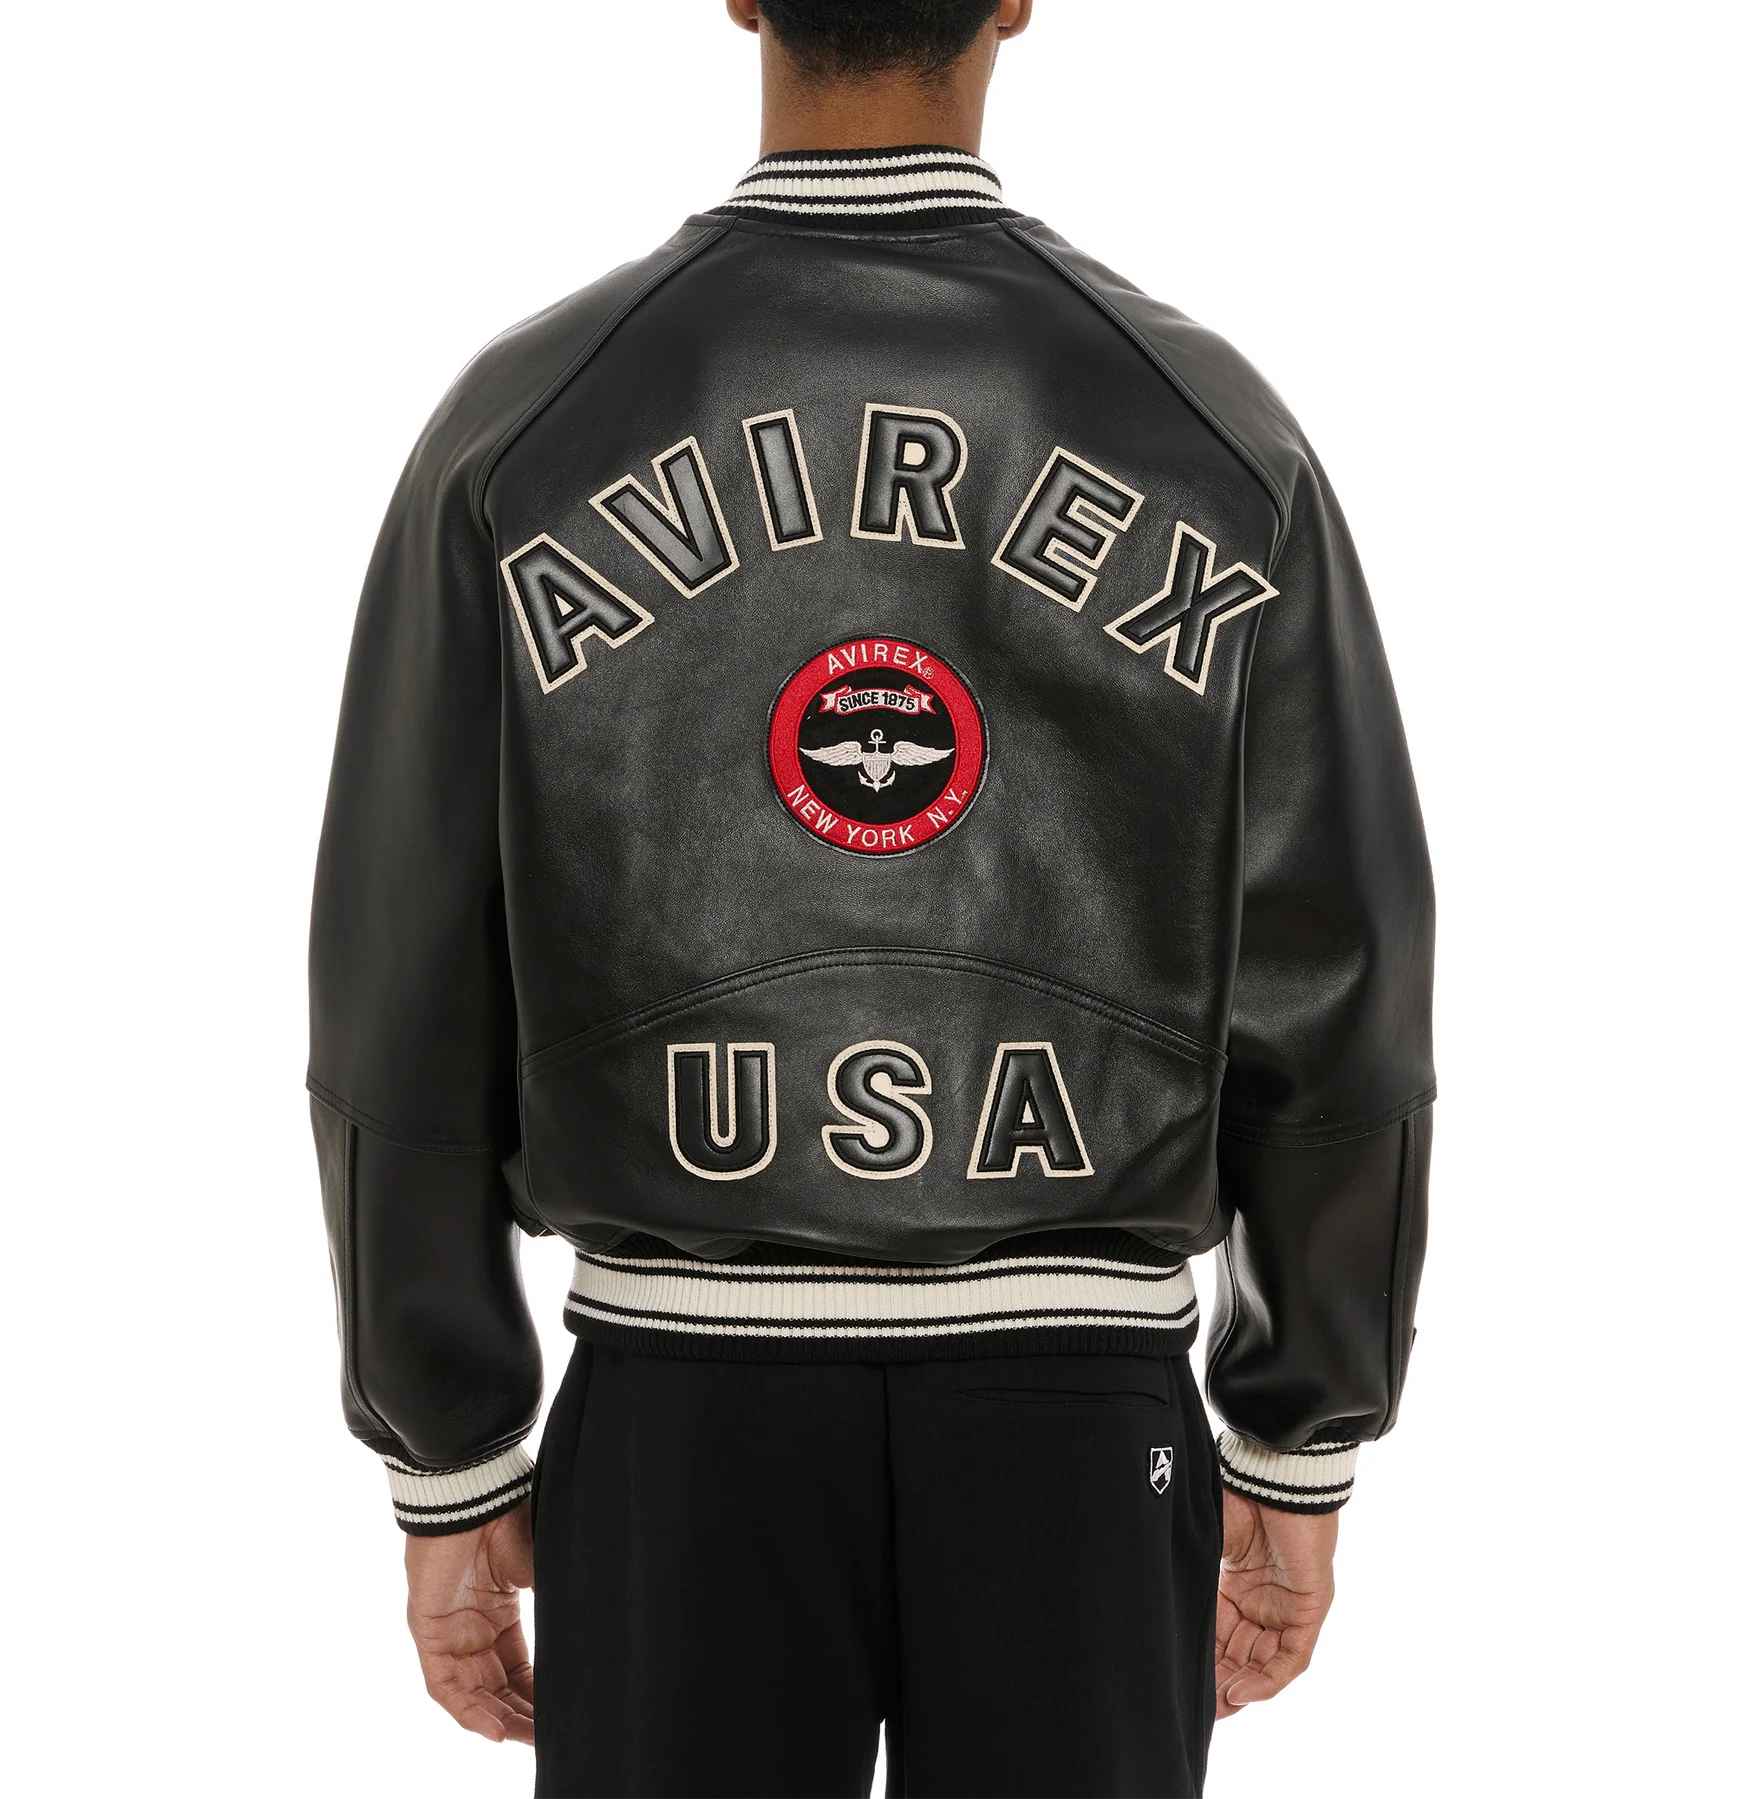 Avirex Varsity Leather Jacket with Embroidered Detailing